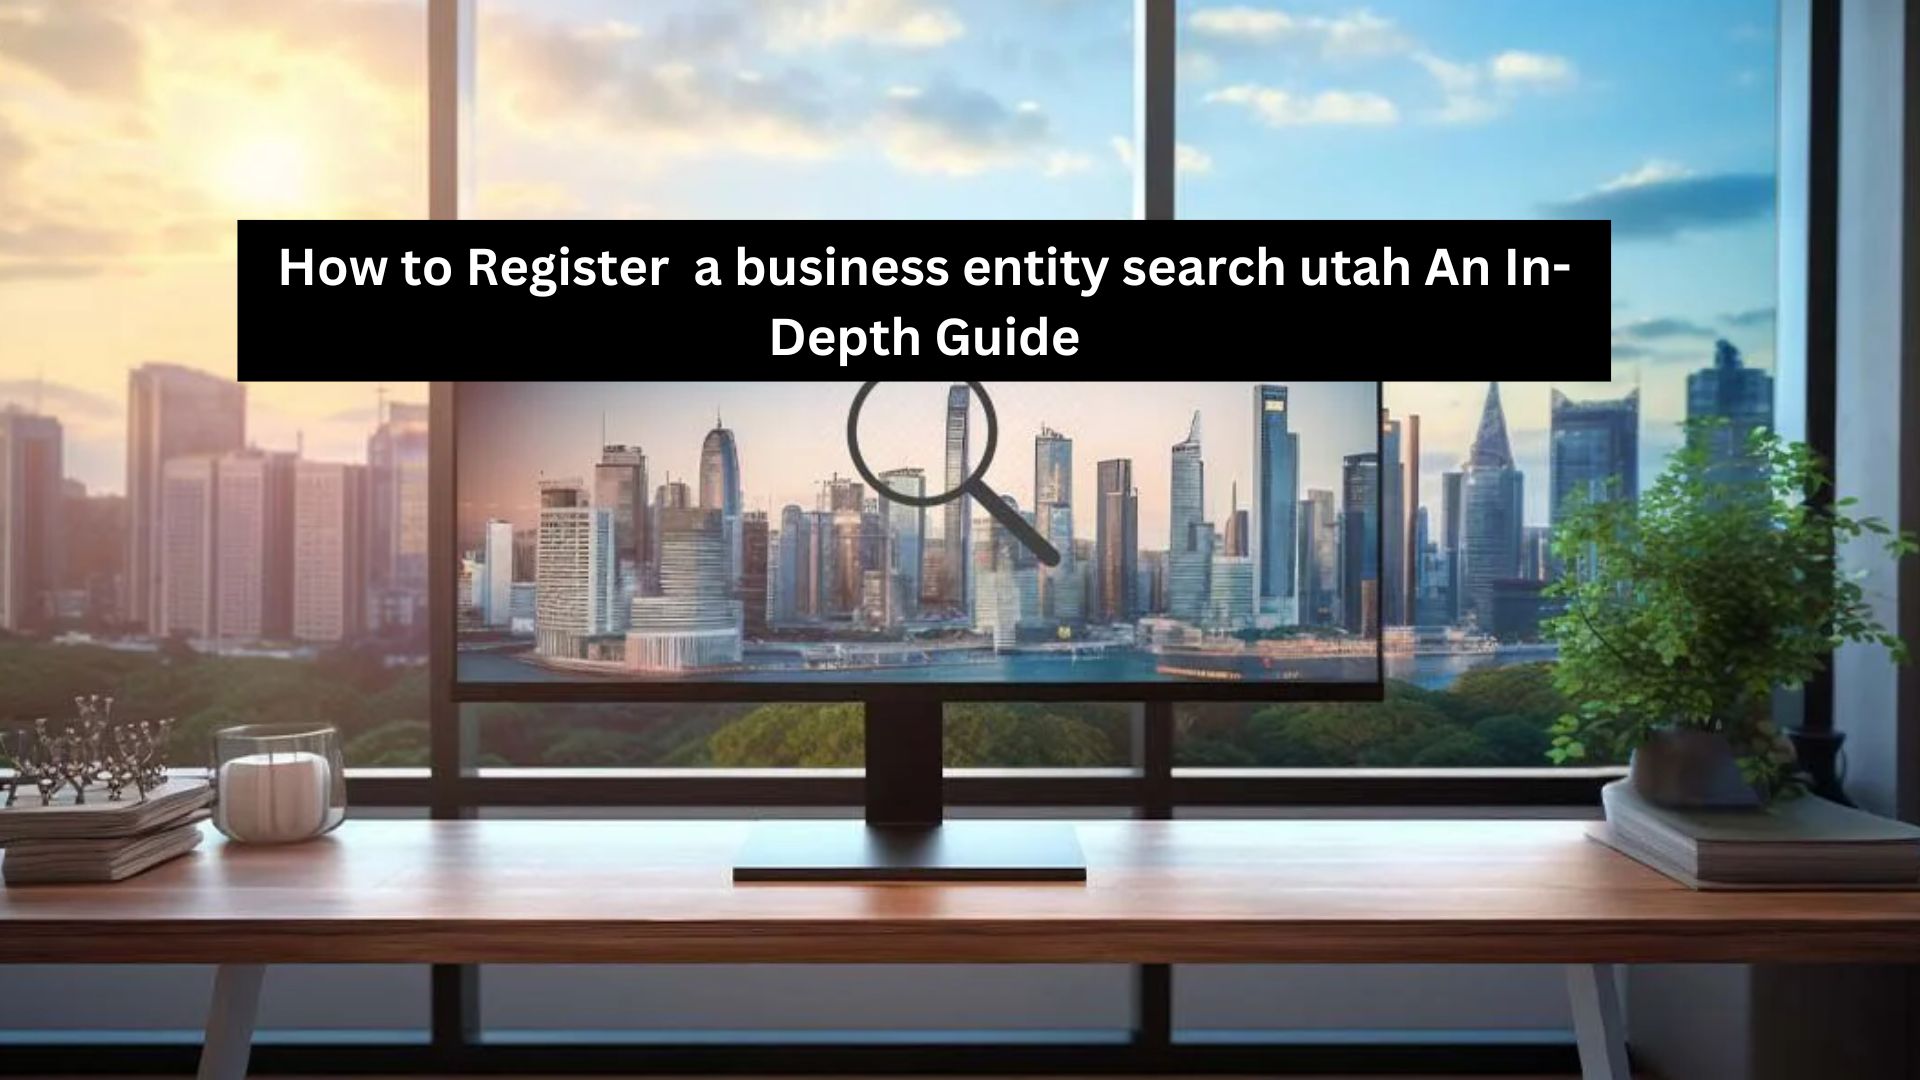 How to Register a business entity search utah An In-Depth Guide